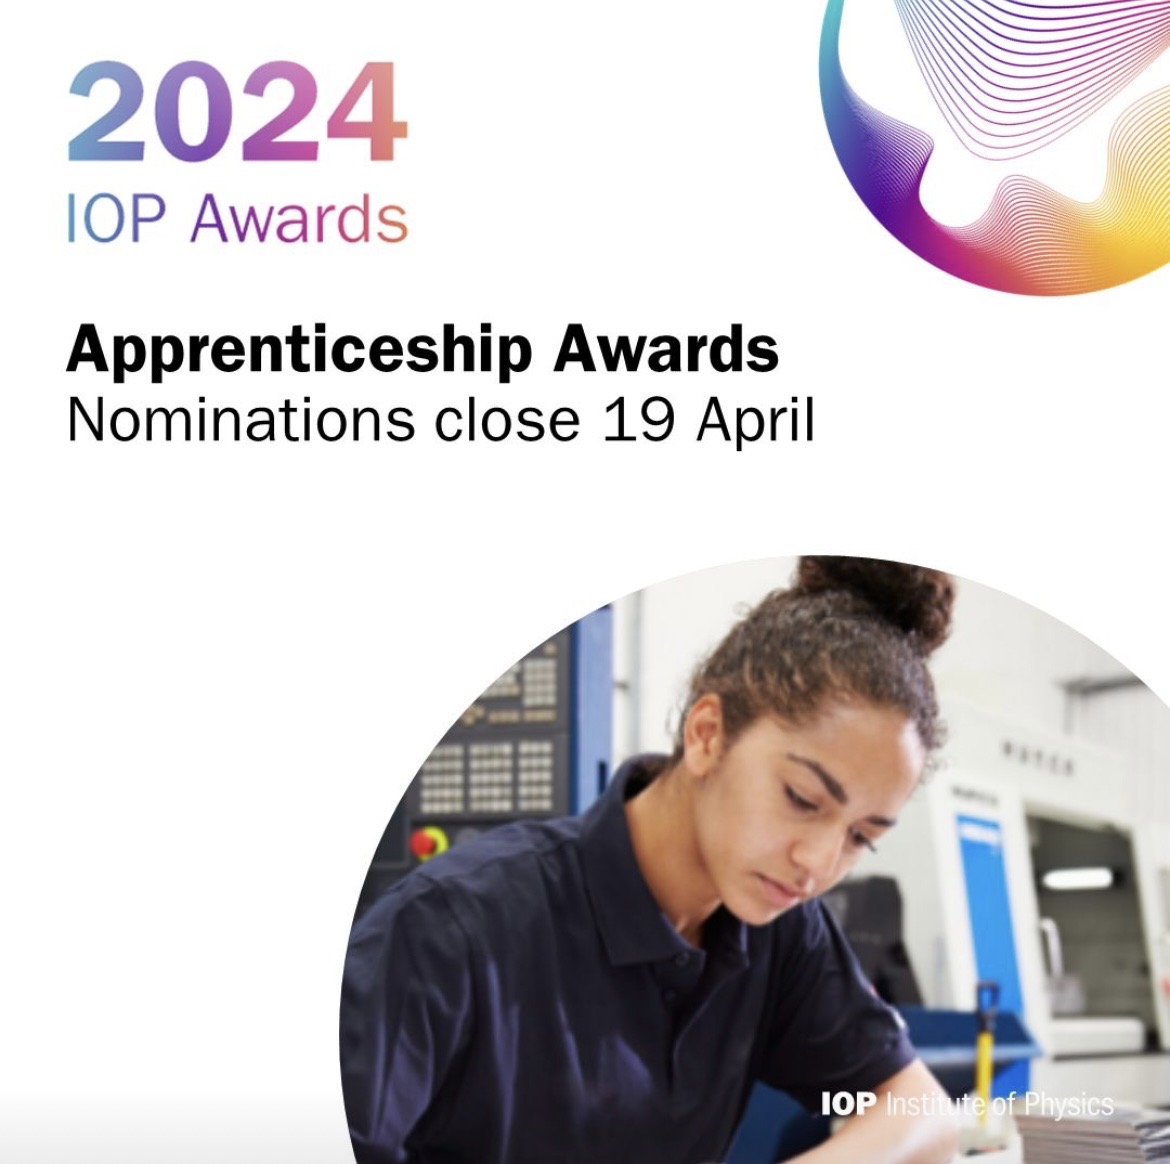 Celebrate apprentices' contributions to #physics! Recognise employers dedicated to scientific and engineering #apprenticeships. Spread the word and nominate deserving candidates! iop.org/about/awards/a… 🎉